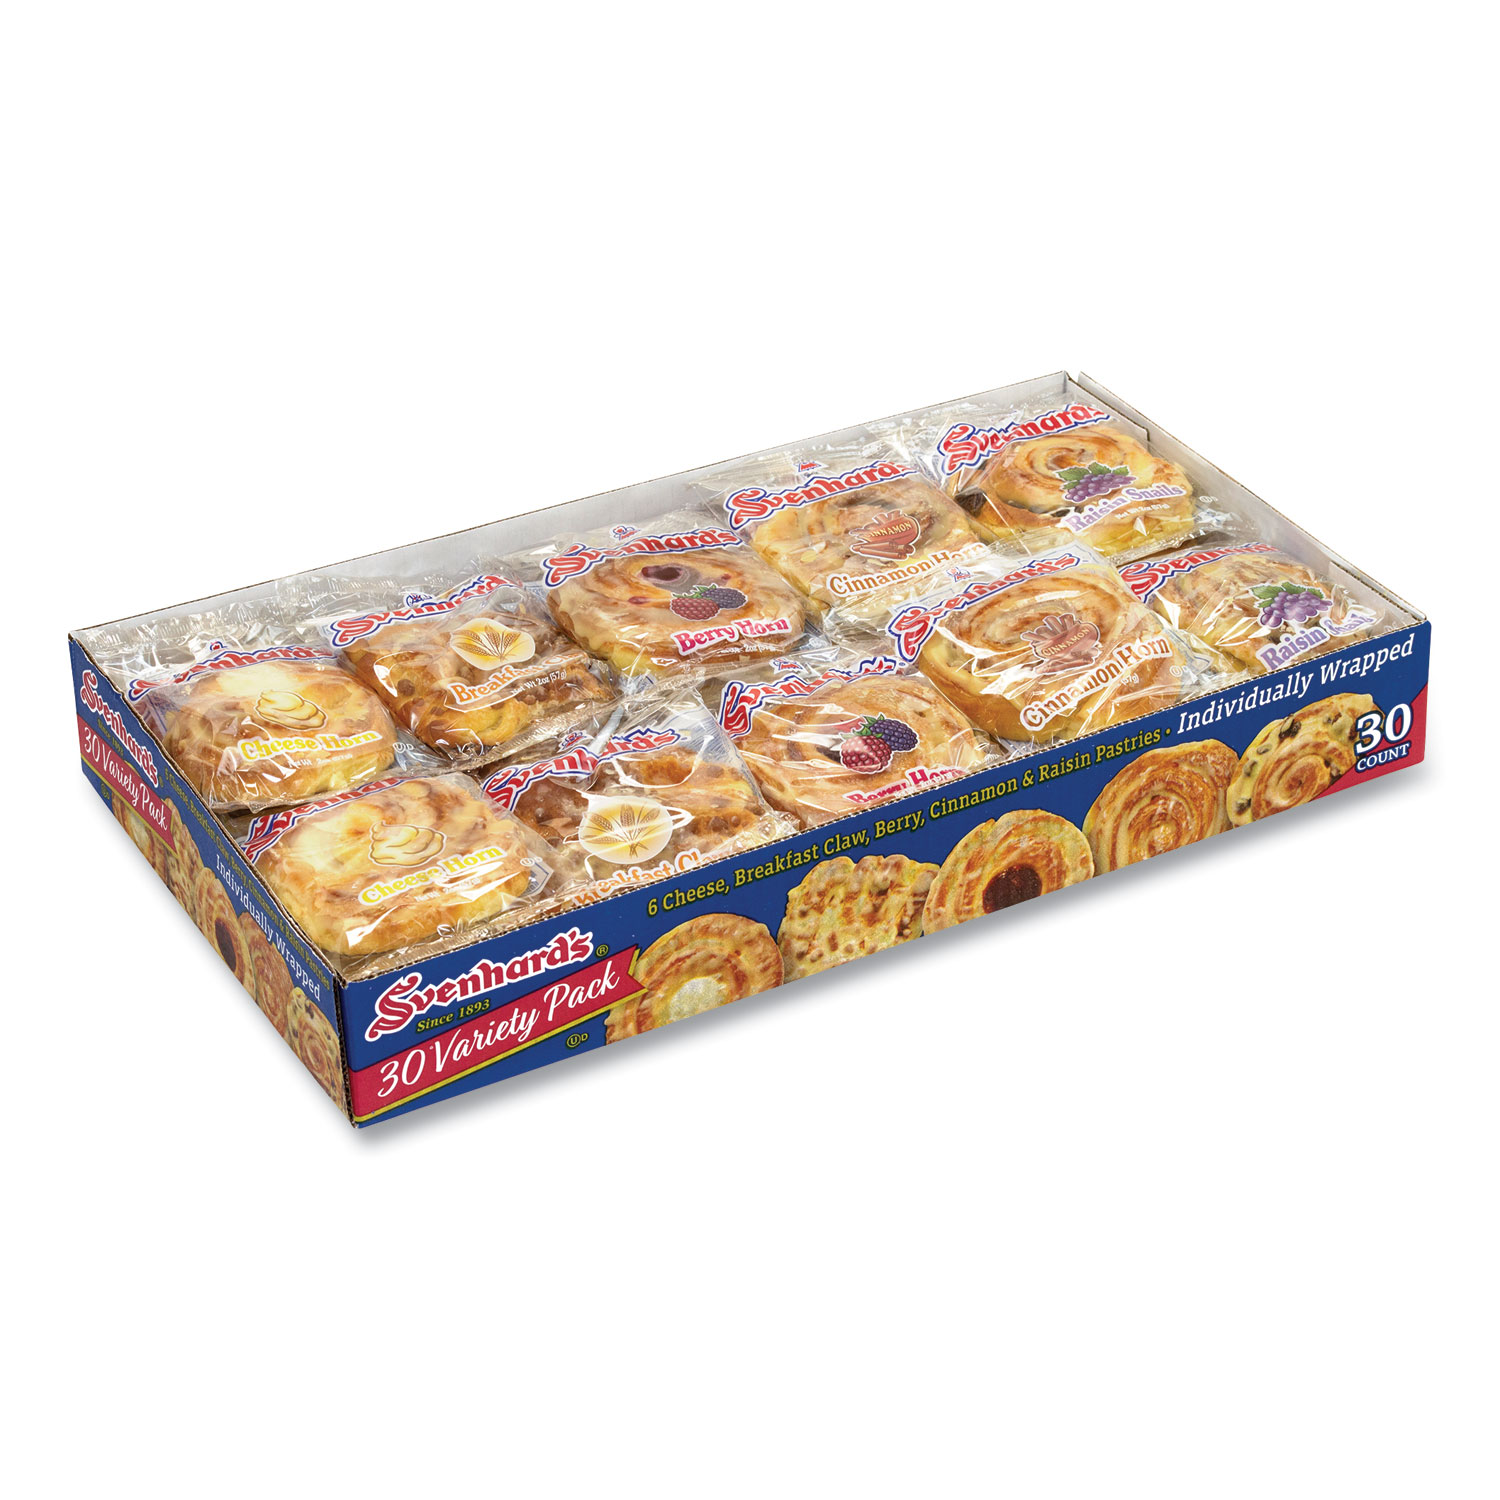  Svenhard's Swedish Bakery 207144 Danish Assortment, Five Flavors, 2 oz Pack, 30 Packs/Box, Free Delivery in 1-4 Business Days (GRR90000068) 